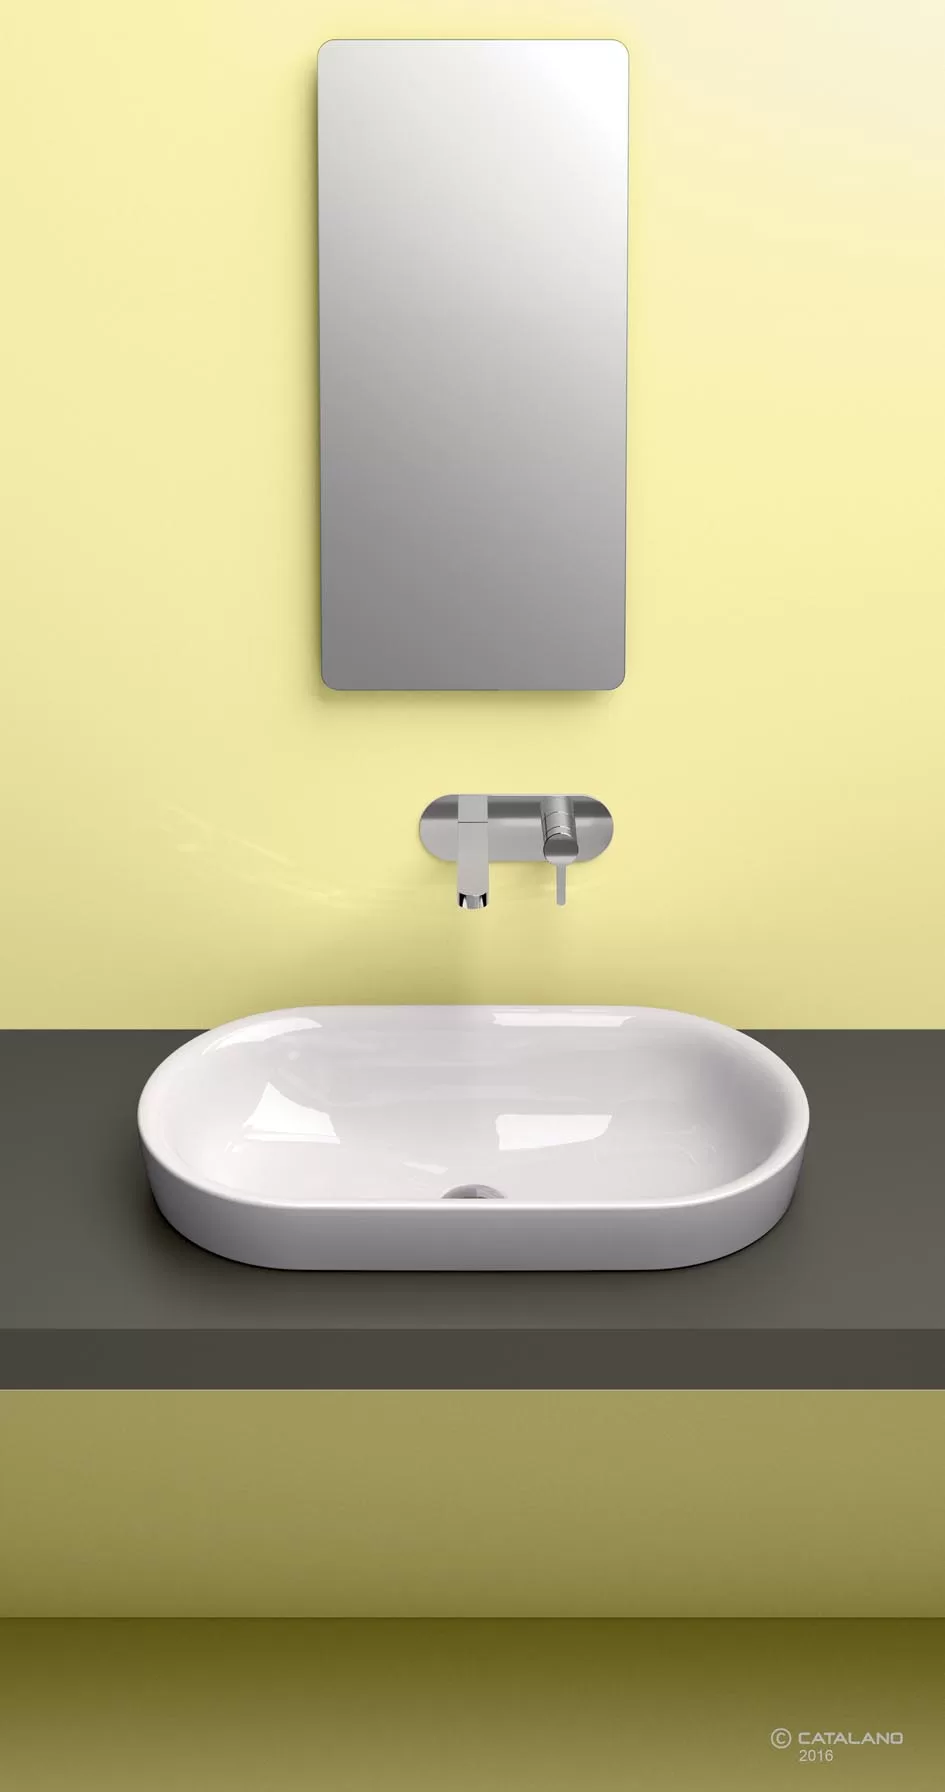 From leading Italian bathware manufacturer comes the new range of Sfera washbasins by Catalano. This new release extends the popular Sfera toilet range with the addition of simple, soft, semi-inset basins, now available in Australia exclusively through Rogerseller.